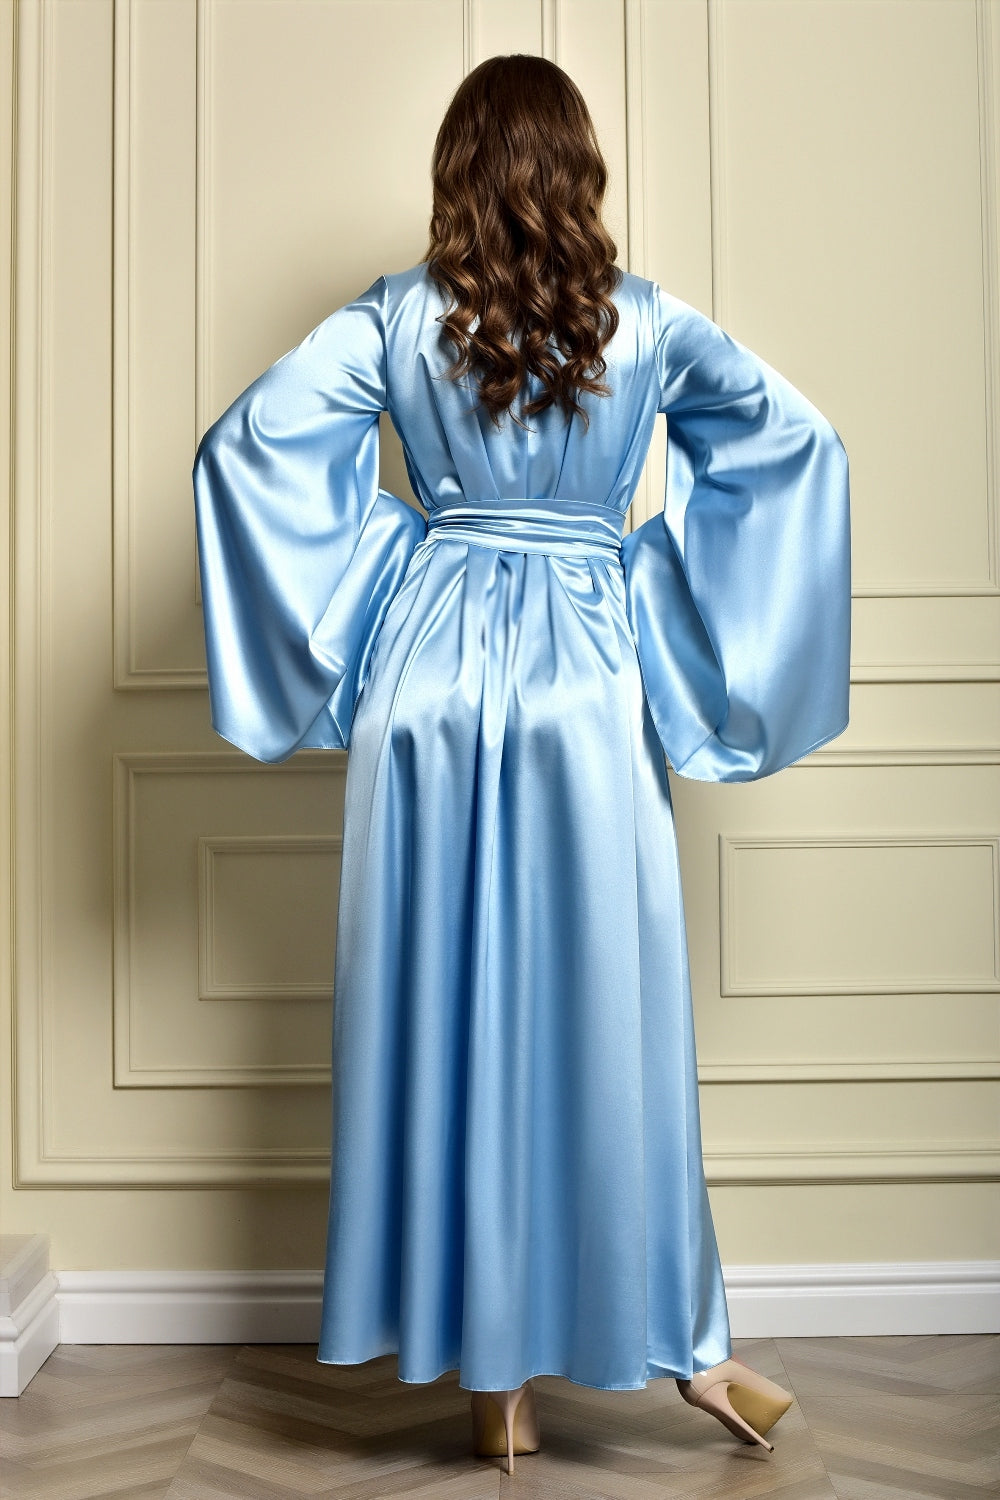 Luxurious sky blue satin robe, perfect for a cozy evening at home